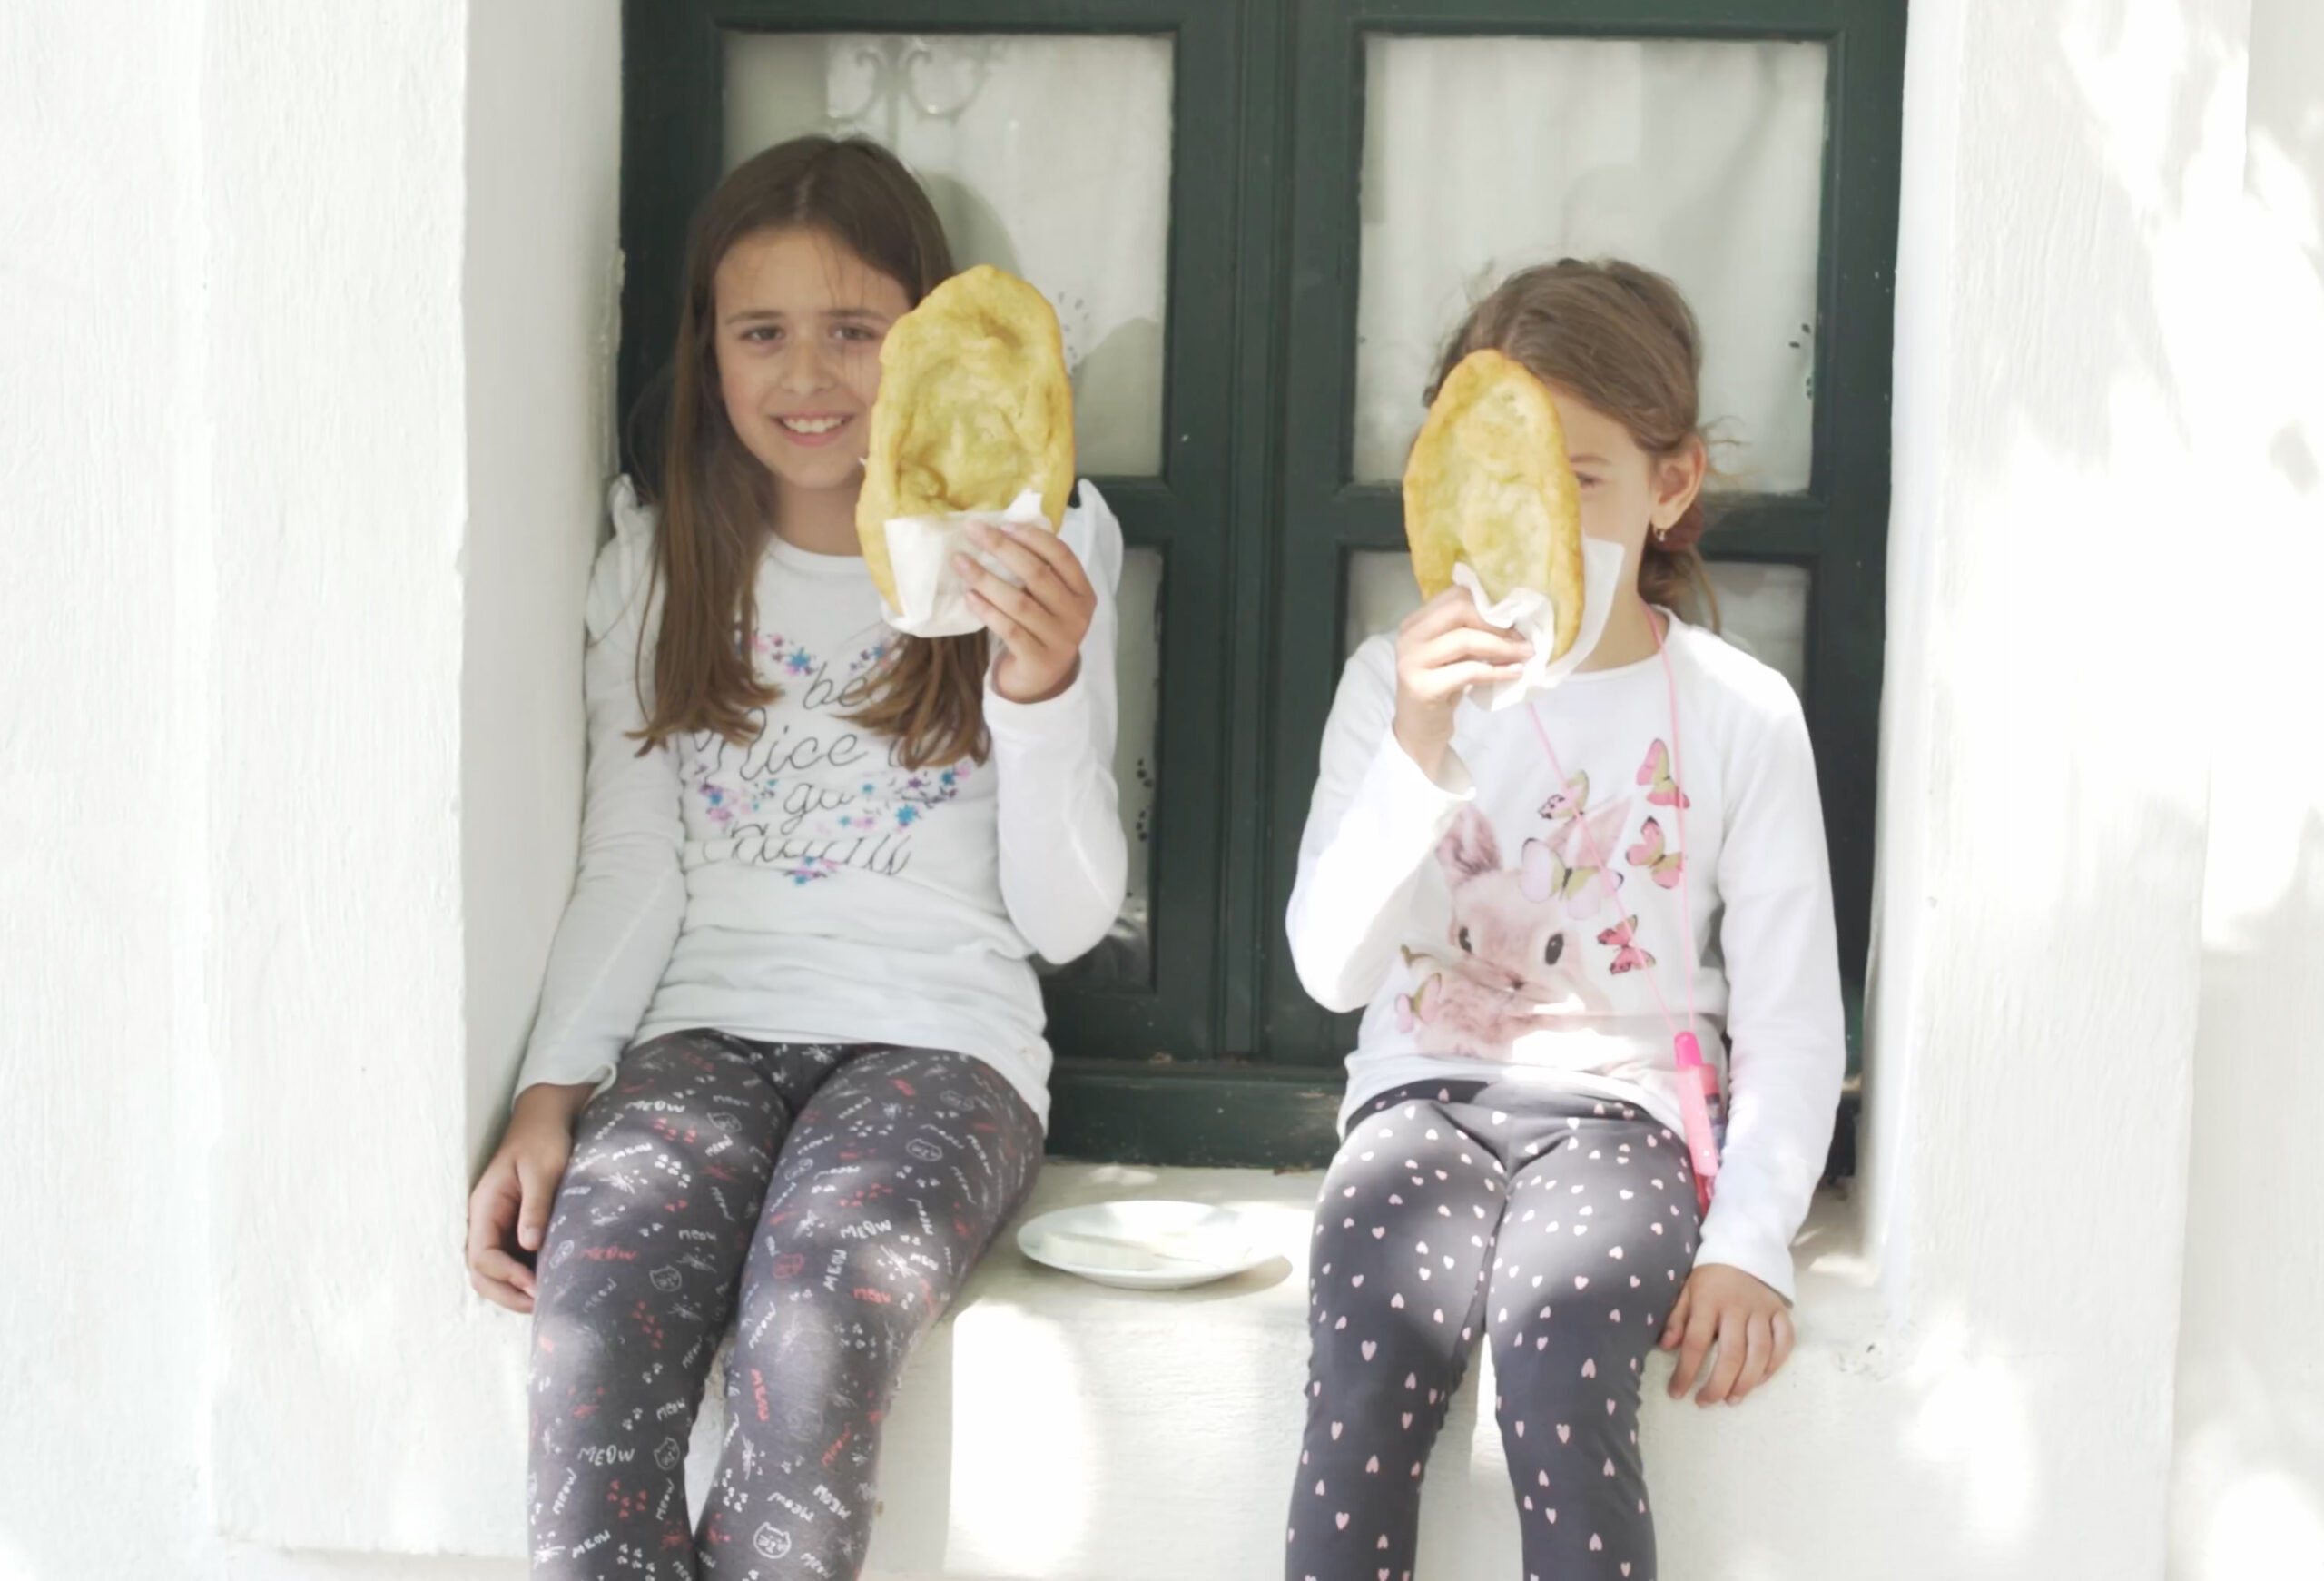 Two young girls holding pita bread.